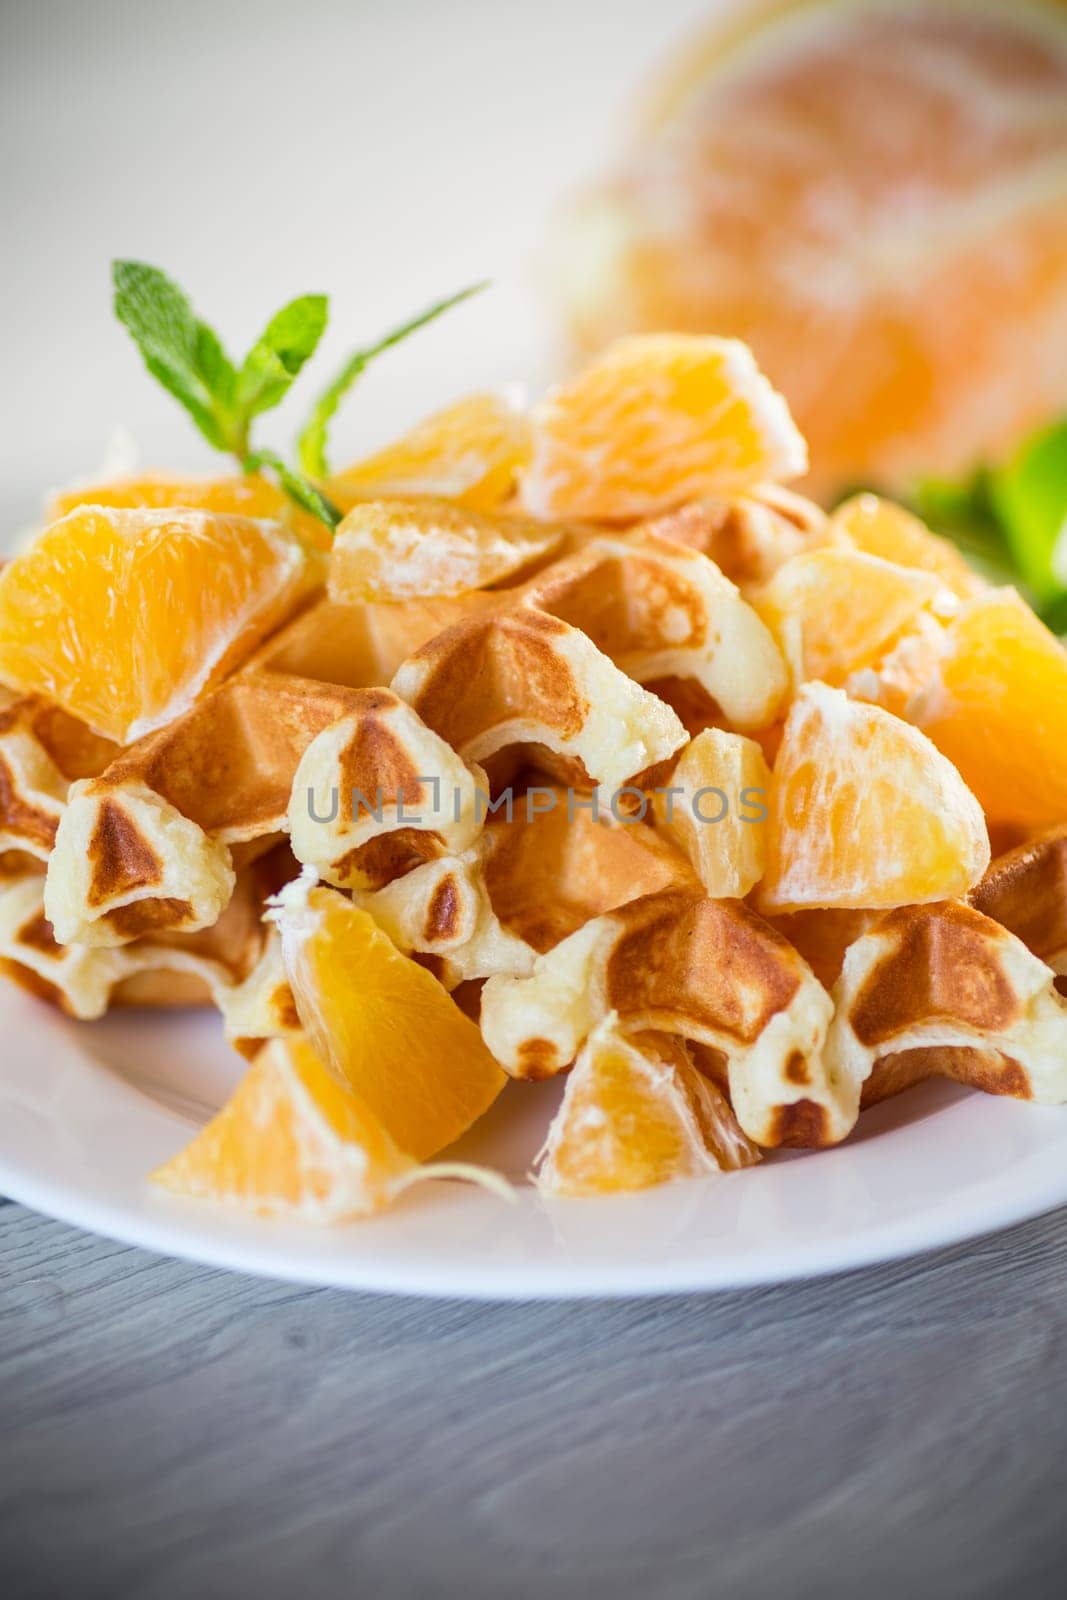 Cooked sweet Belgian waffles with oranges on a wooden table.